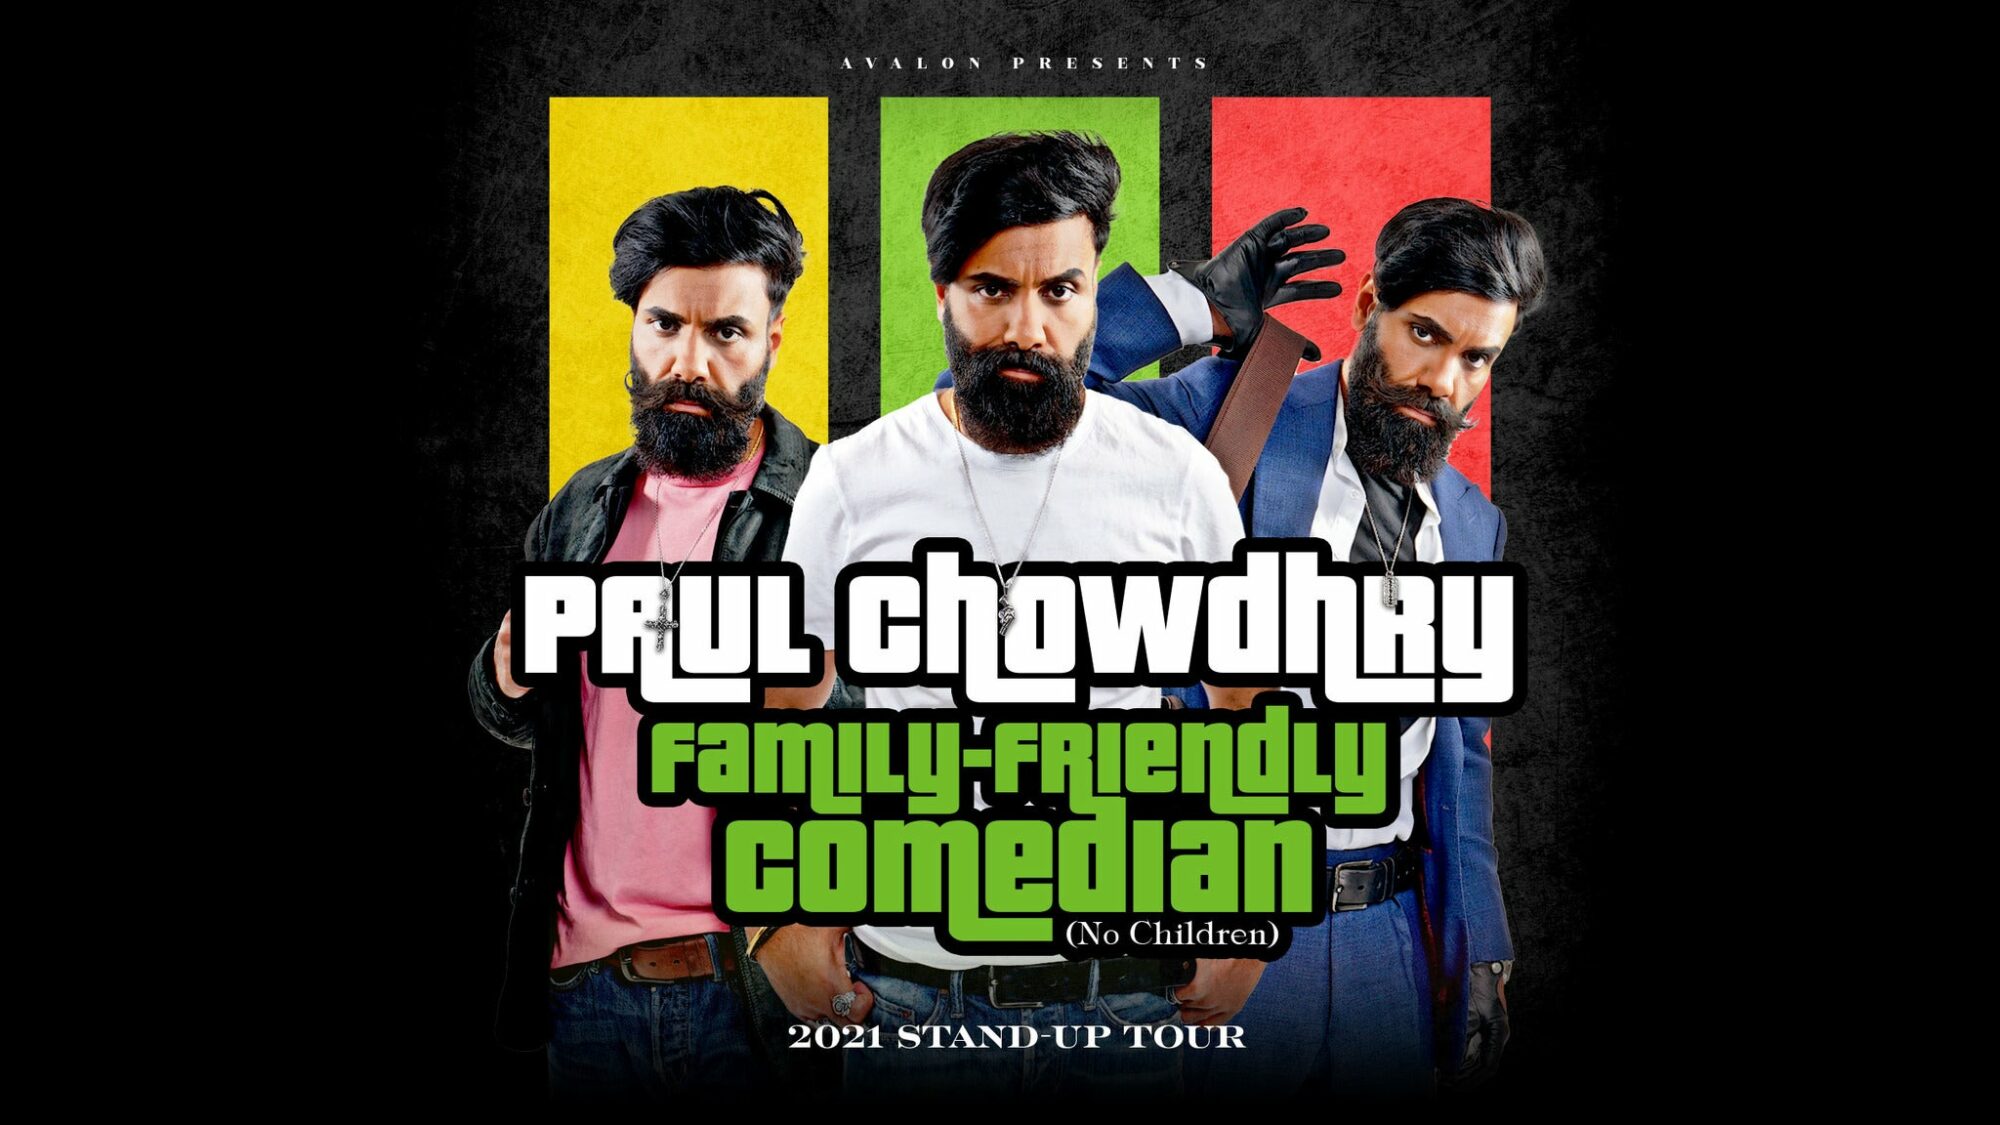 Image name Paul Chowdhry Family Friendly Comedian at St Georges Hall Bradford Bradford the 11 image from the post Events in Yorkshire.com.